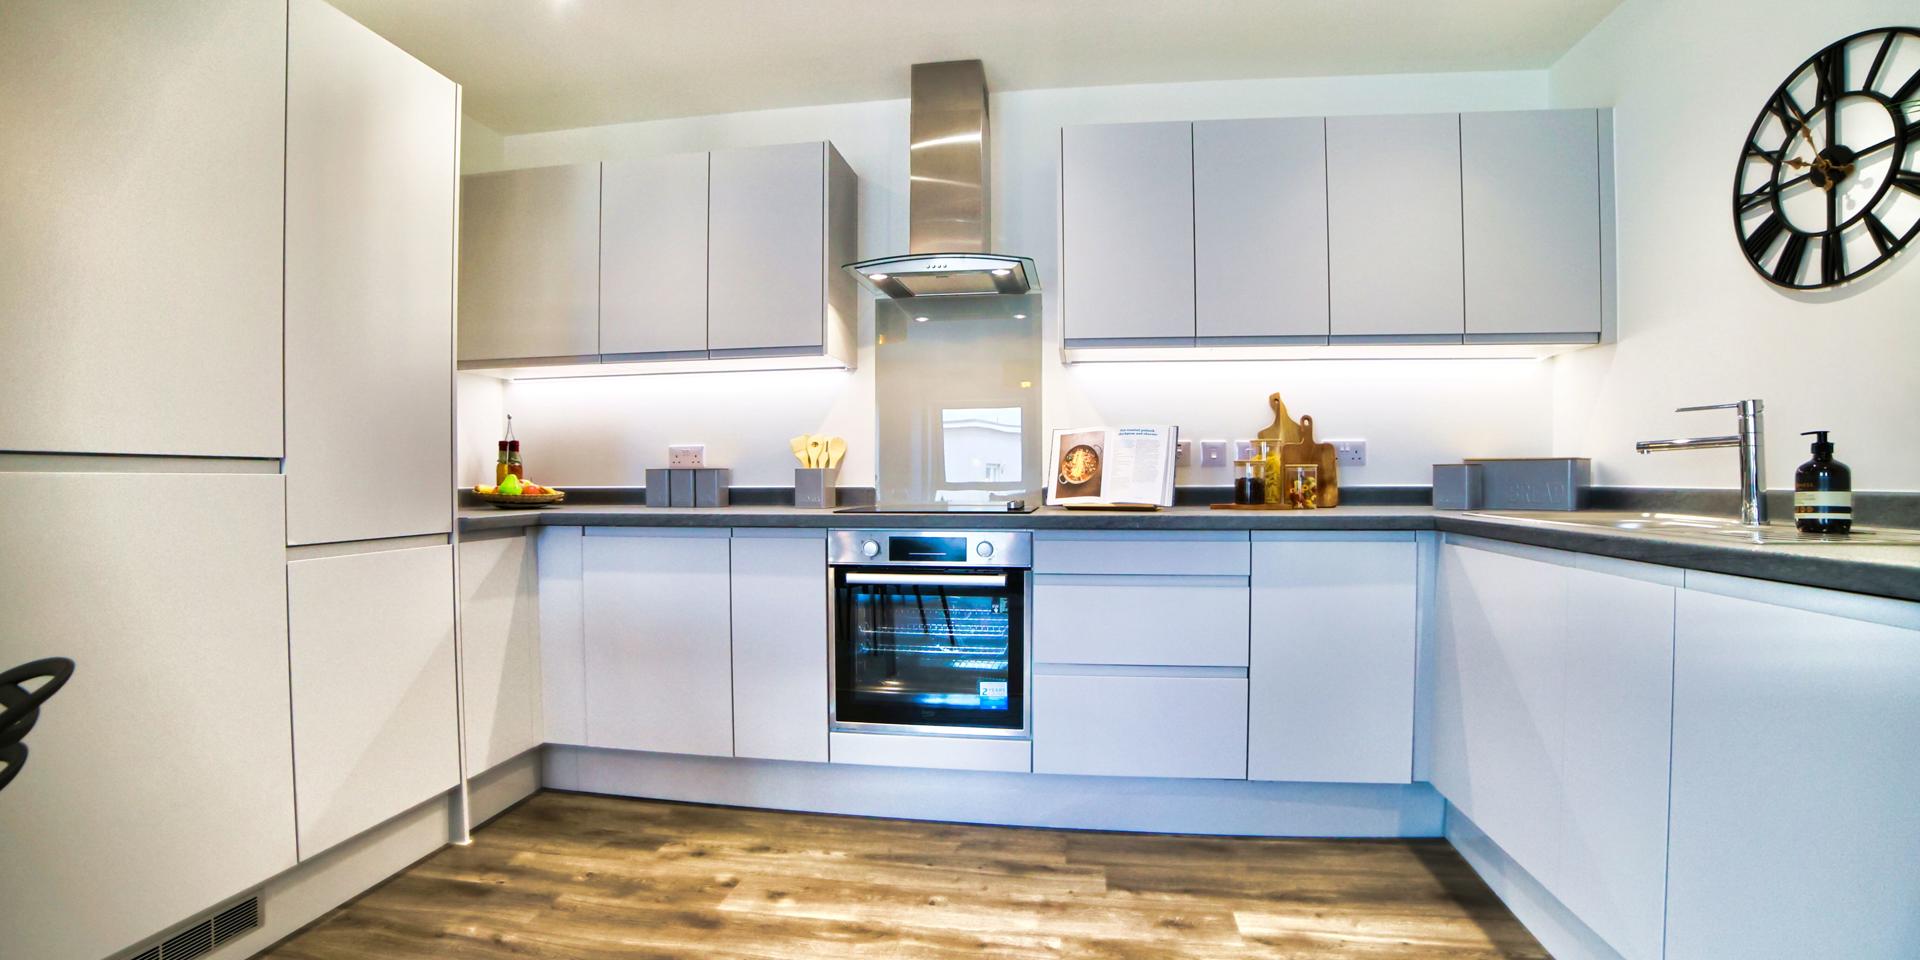 Fully fitted kitchen with integrated appliances and handless grey units